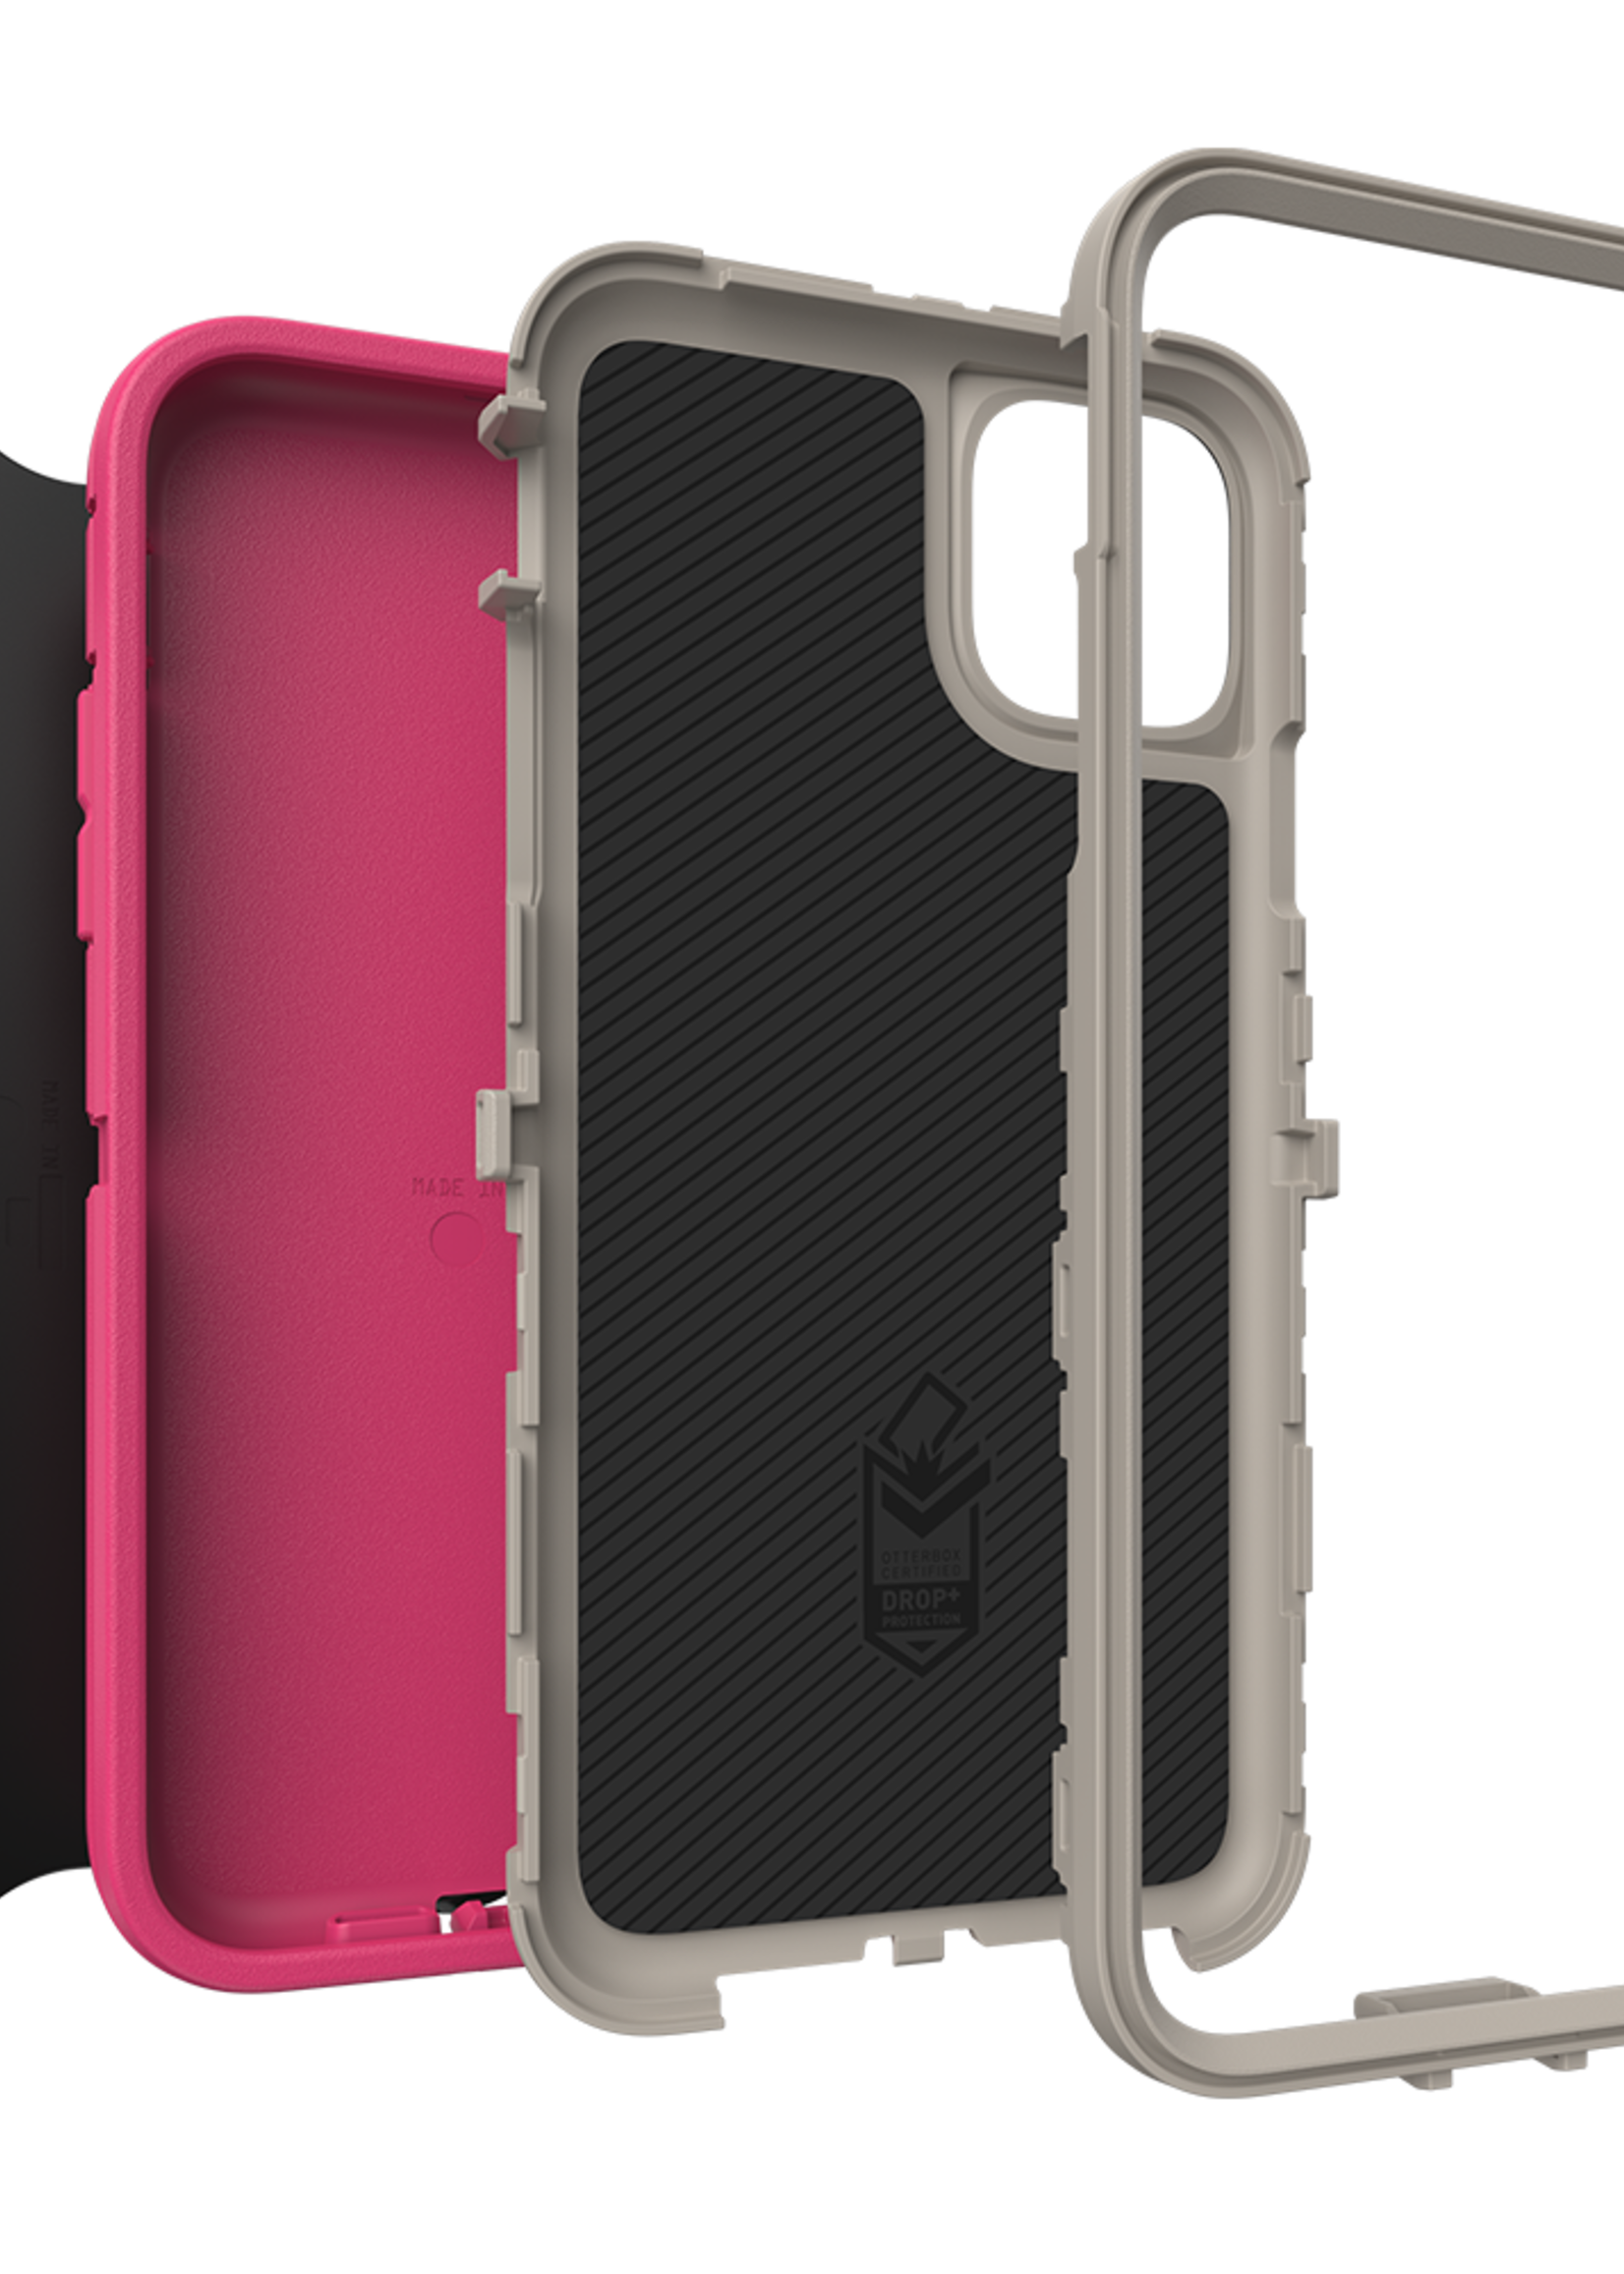 Otterbox OtterBox - Defender Case for Apple iPhone 11 Pro Max - Love Bug